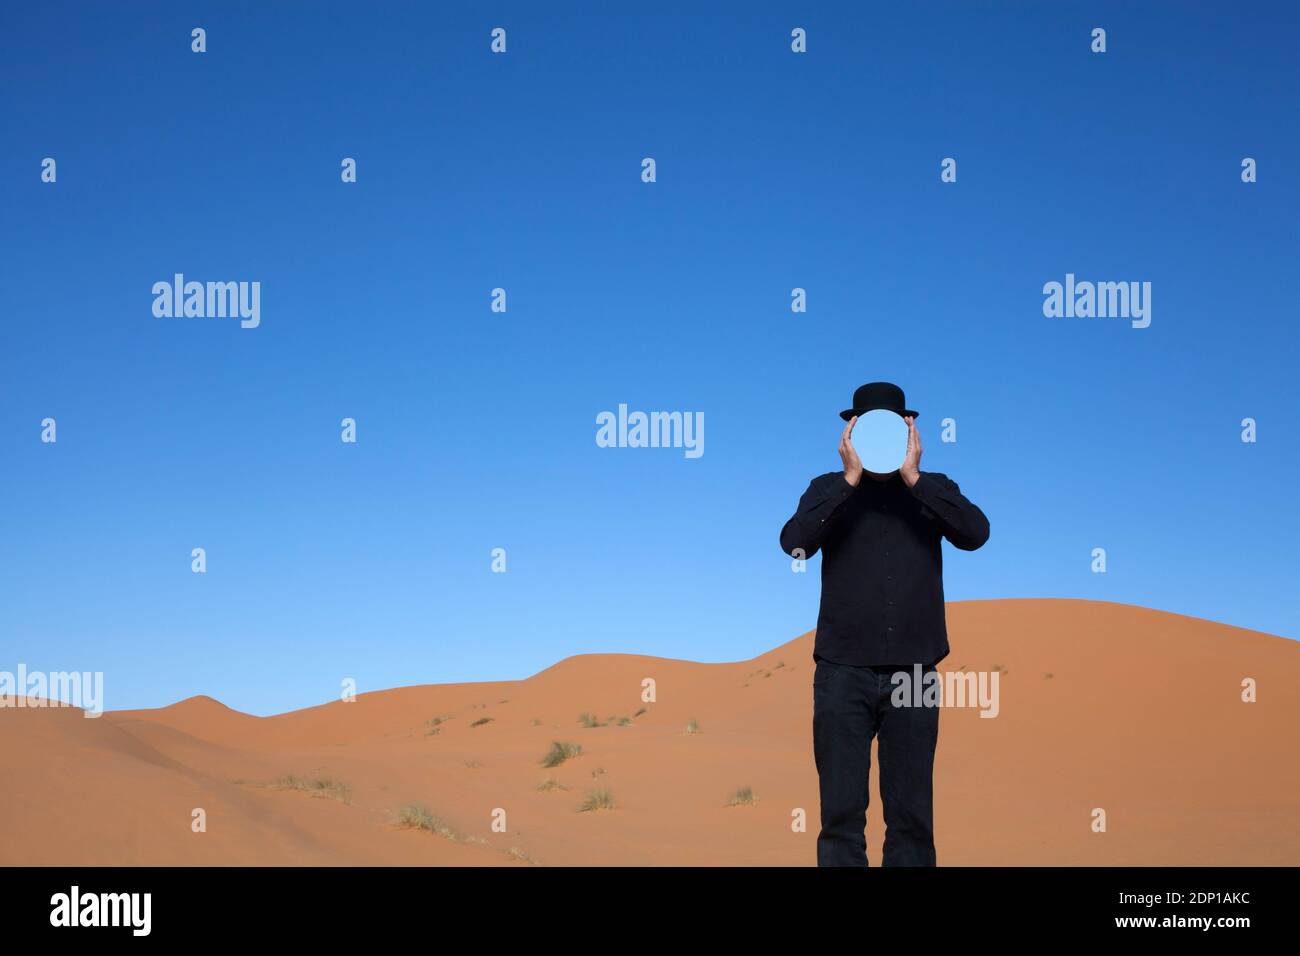 Morocco, Merzouga, Erg Chebbi, man wearing a bowler hat holding mirror in front of his face in desert dune Stock Photo